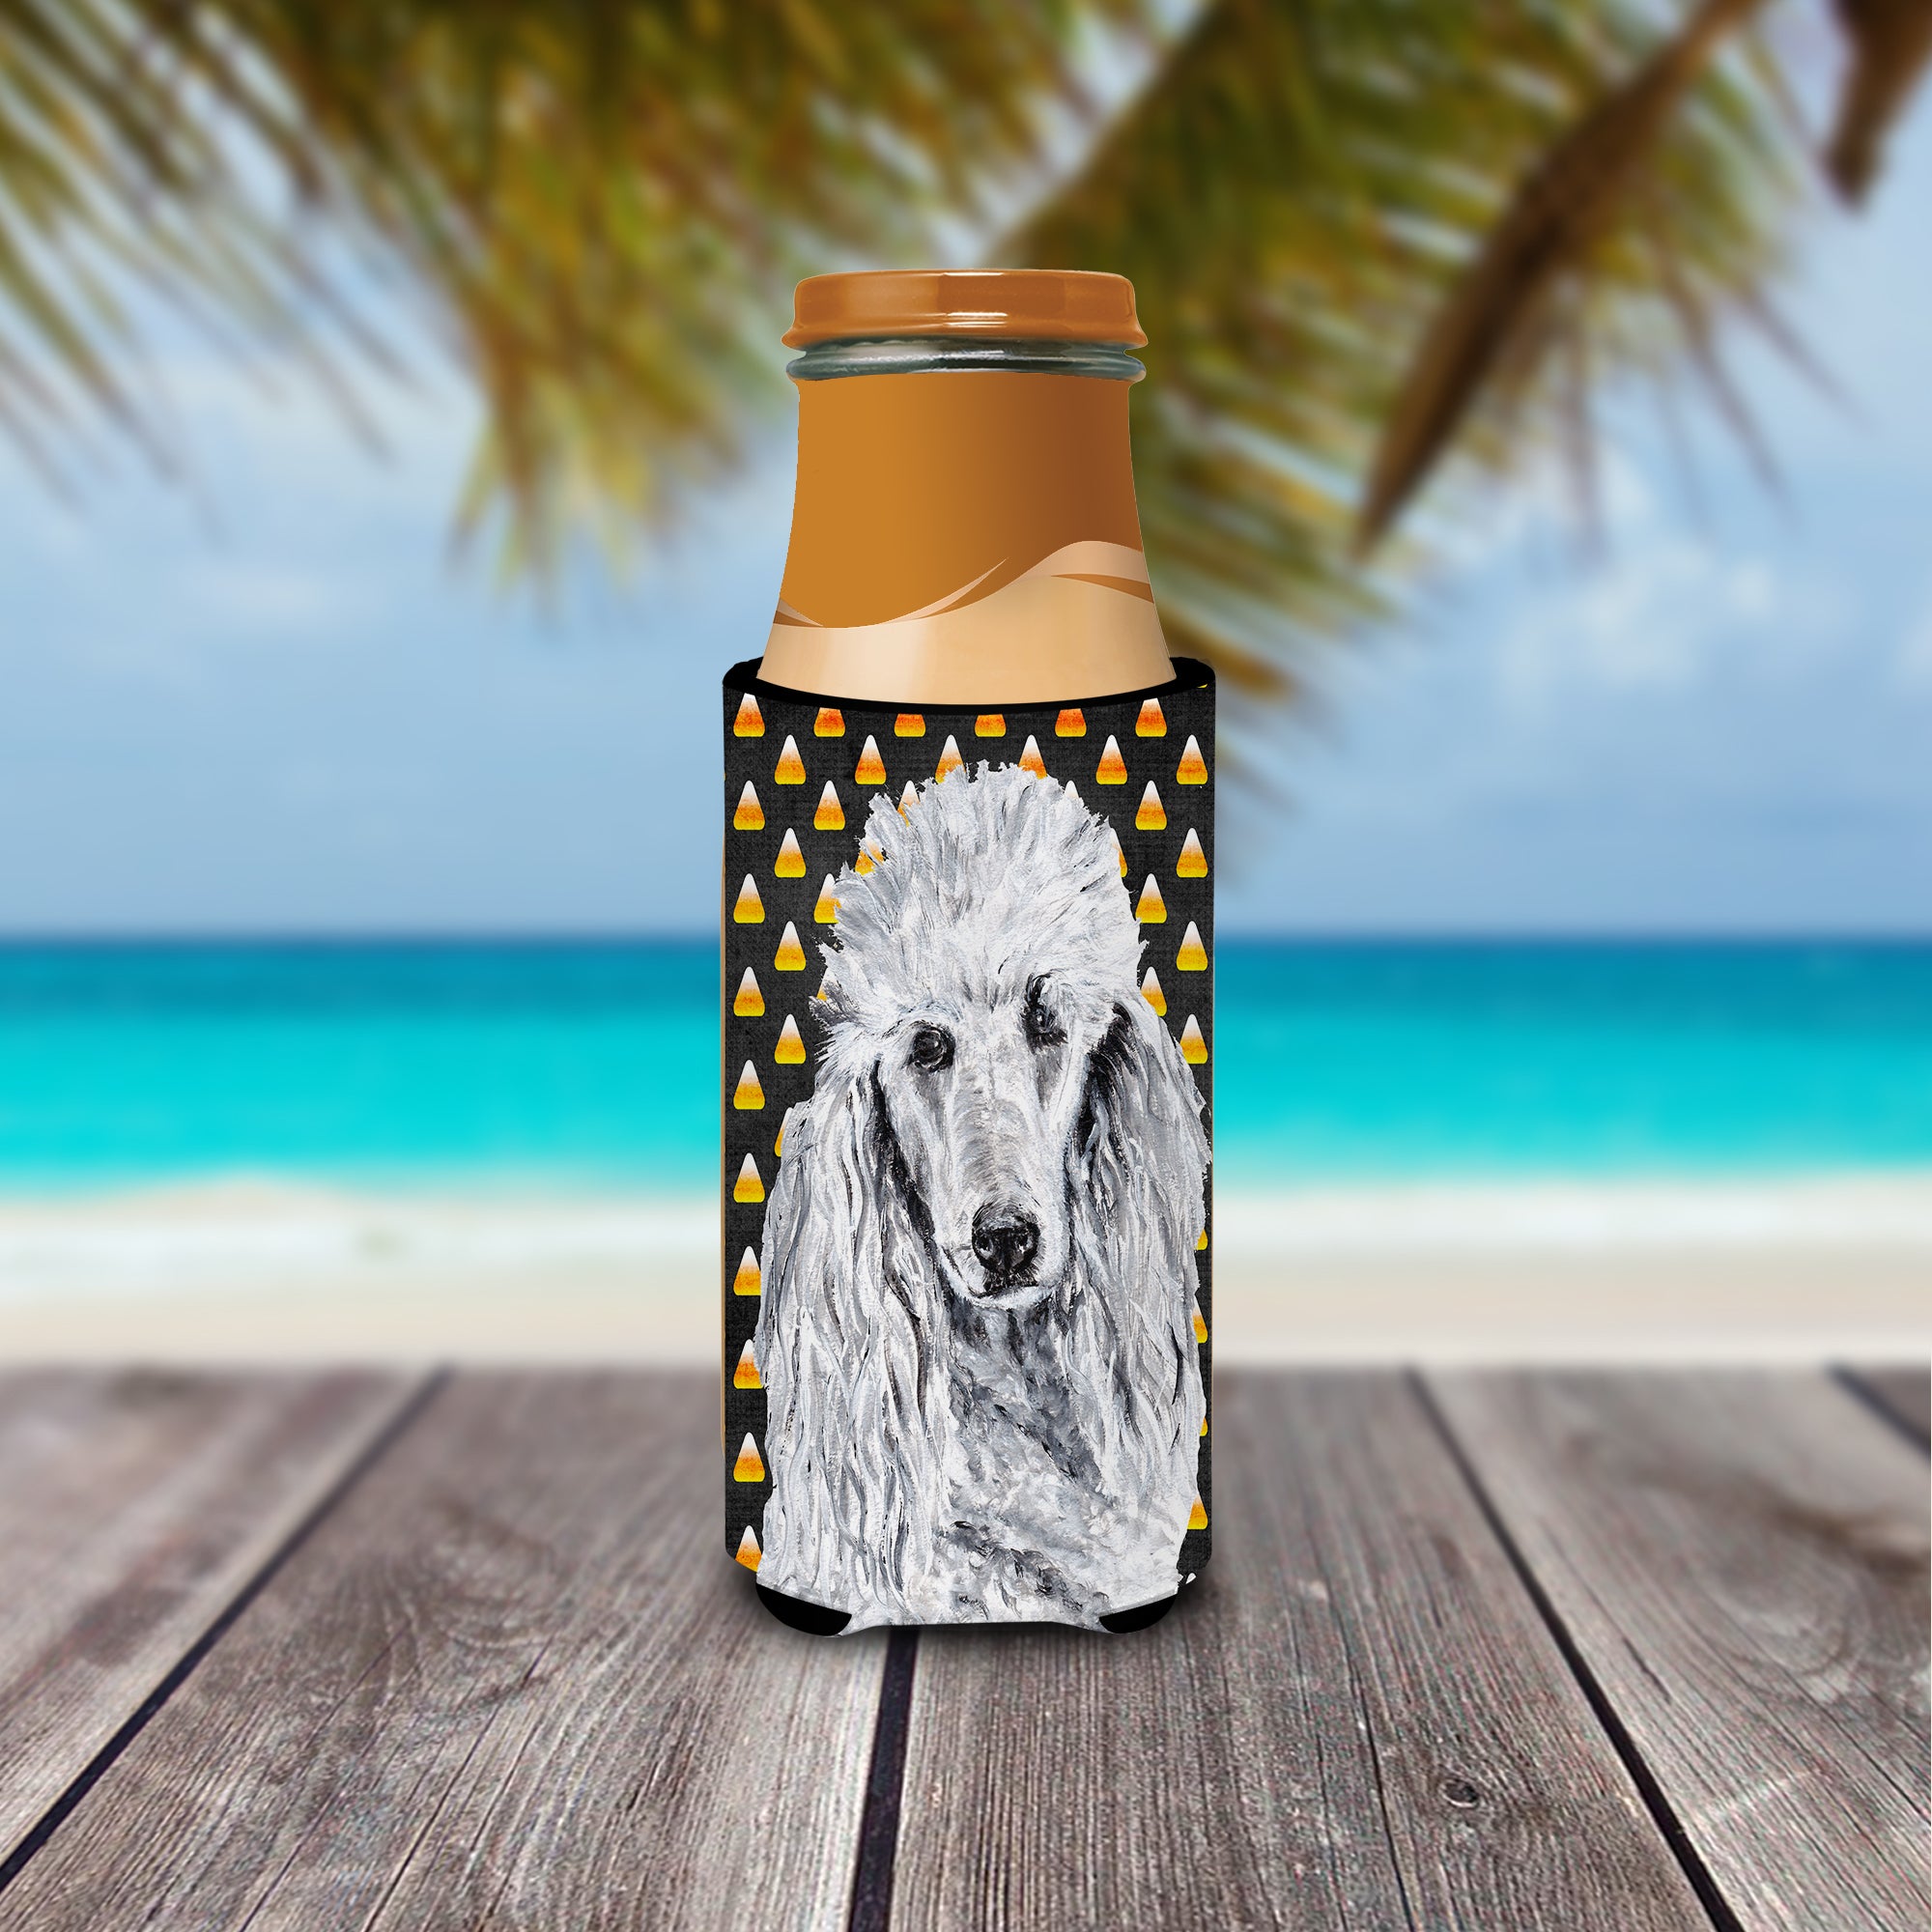 White Standard Poodle Candy Corn Halloween Ultra Beverage Insulators for slim cans SC9655MUK.